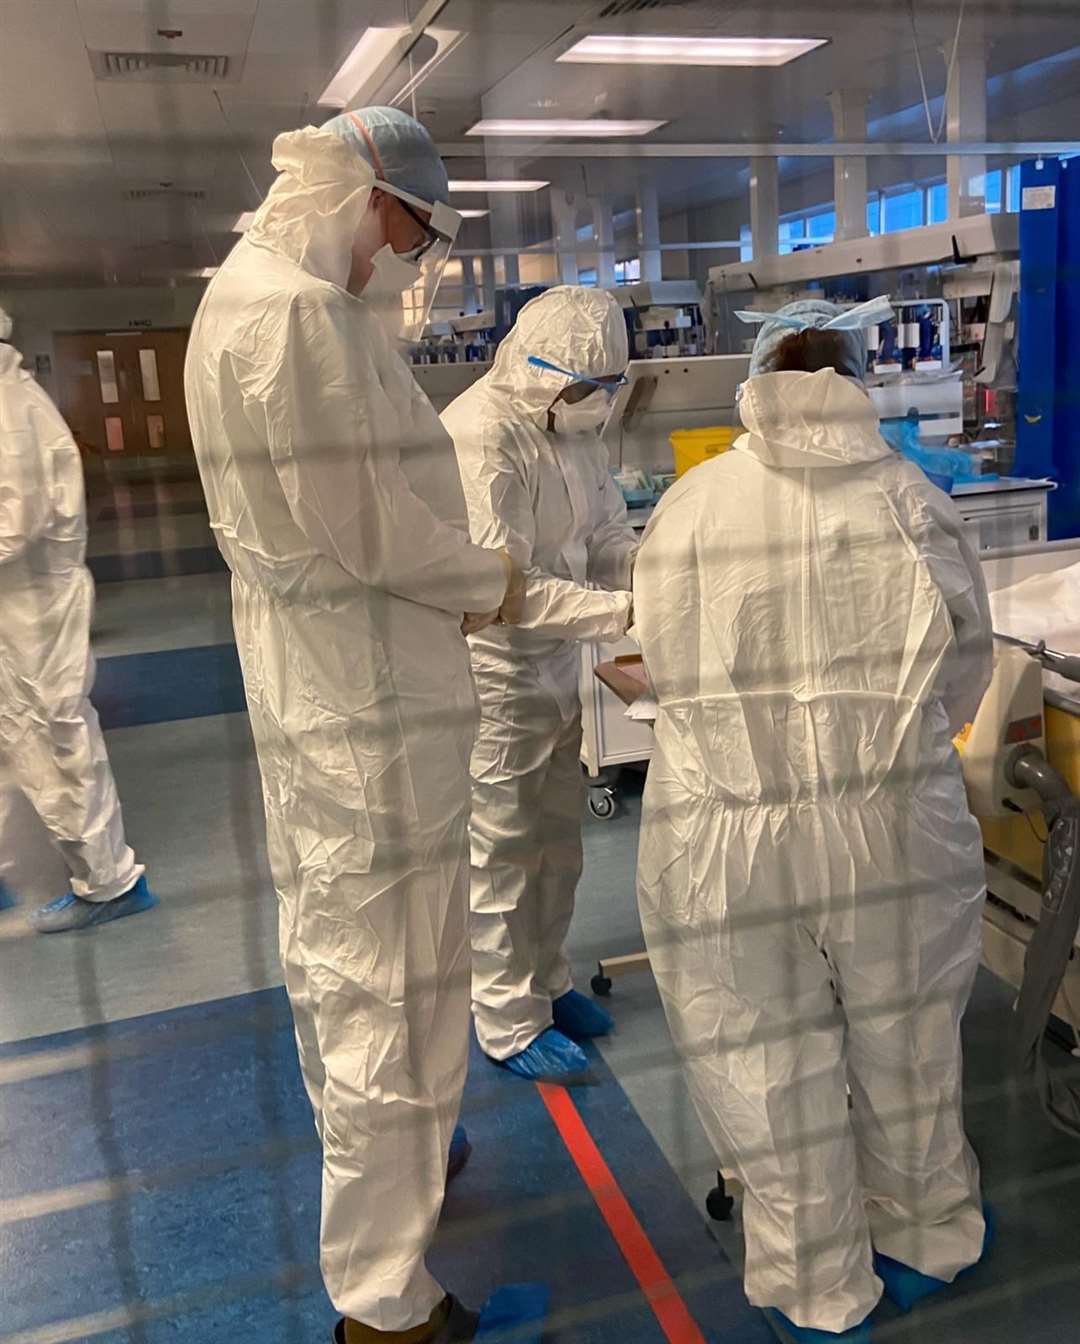 PPE, like these worn by medics at Darent Valley Hospital in Dartford, were supplied as part of a government call for businesses and the public to help with supply chains early in the pandemic last year